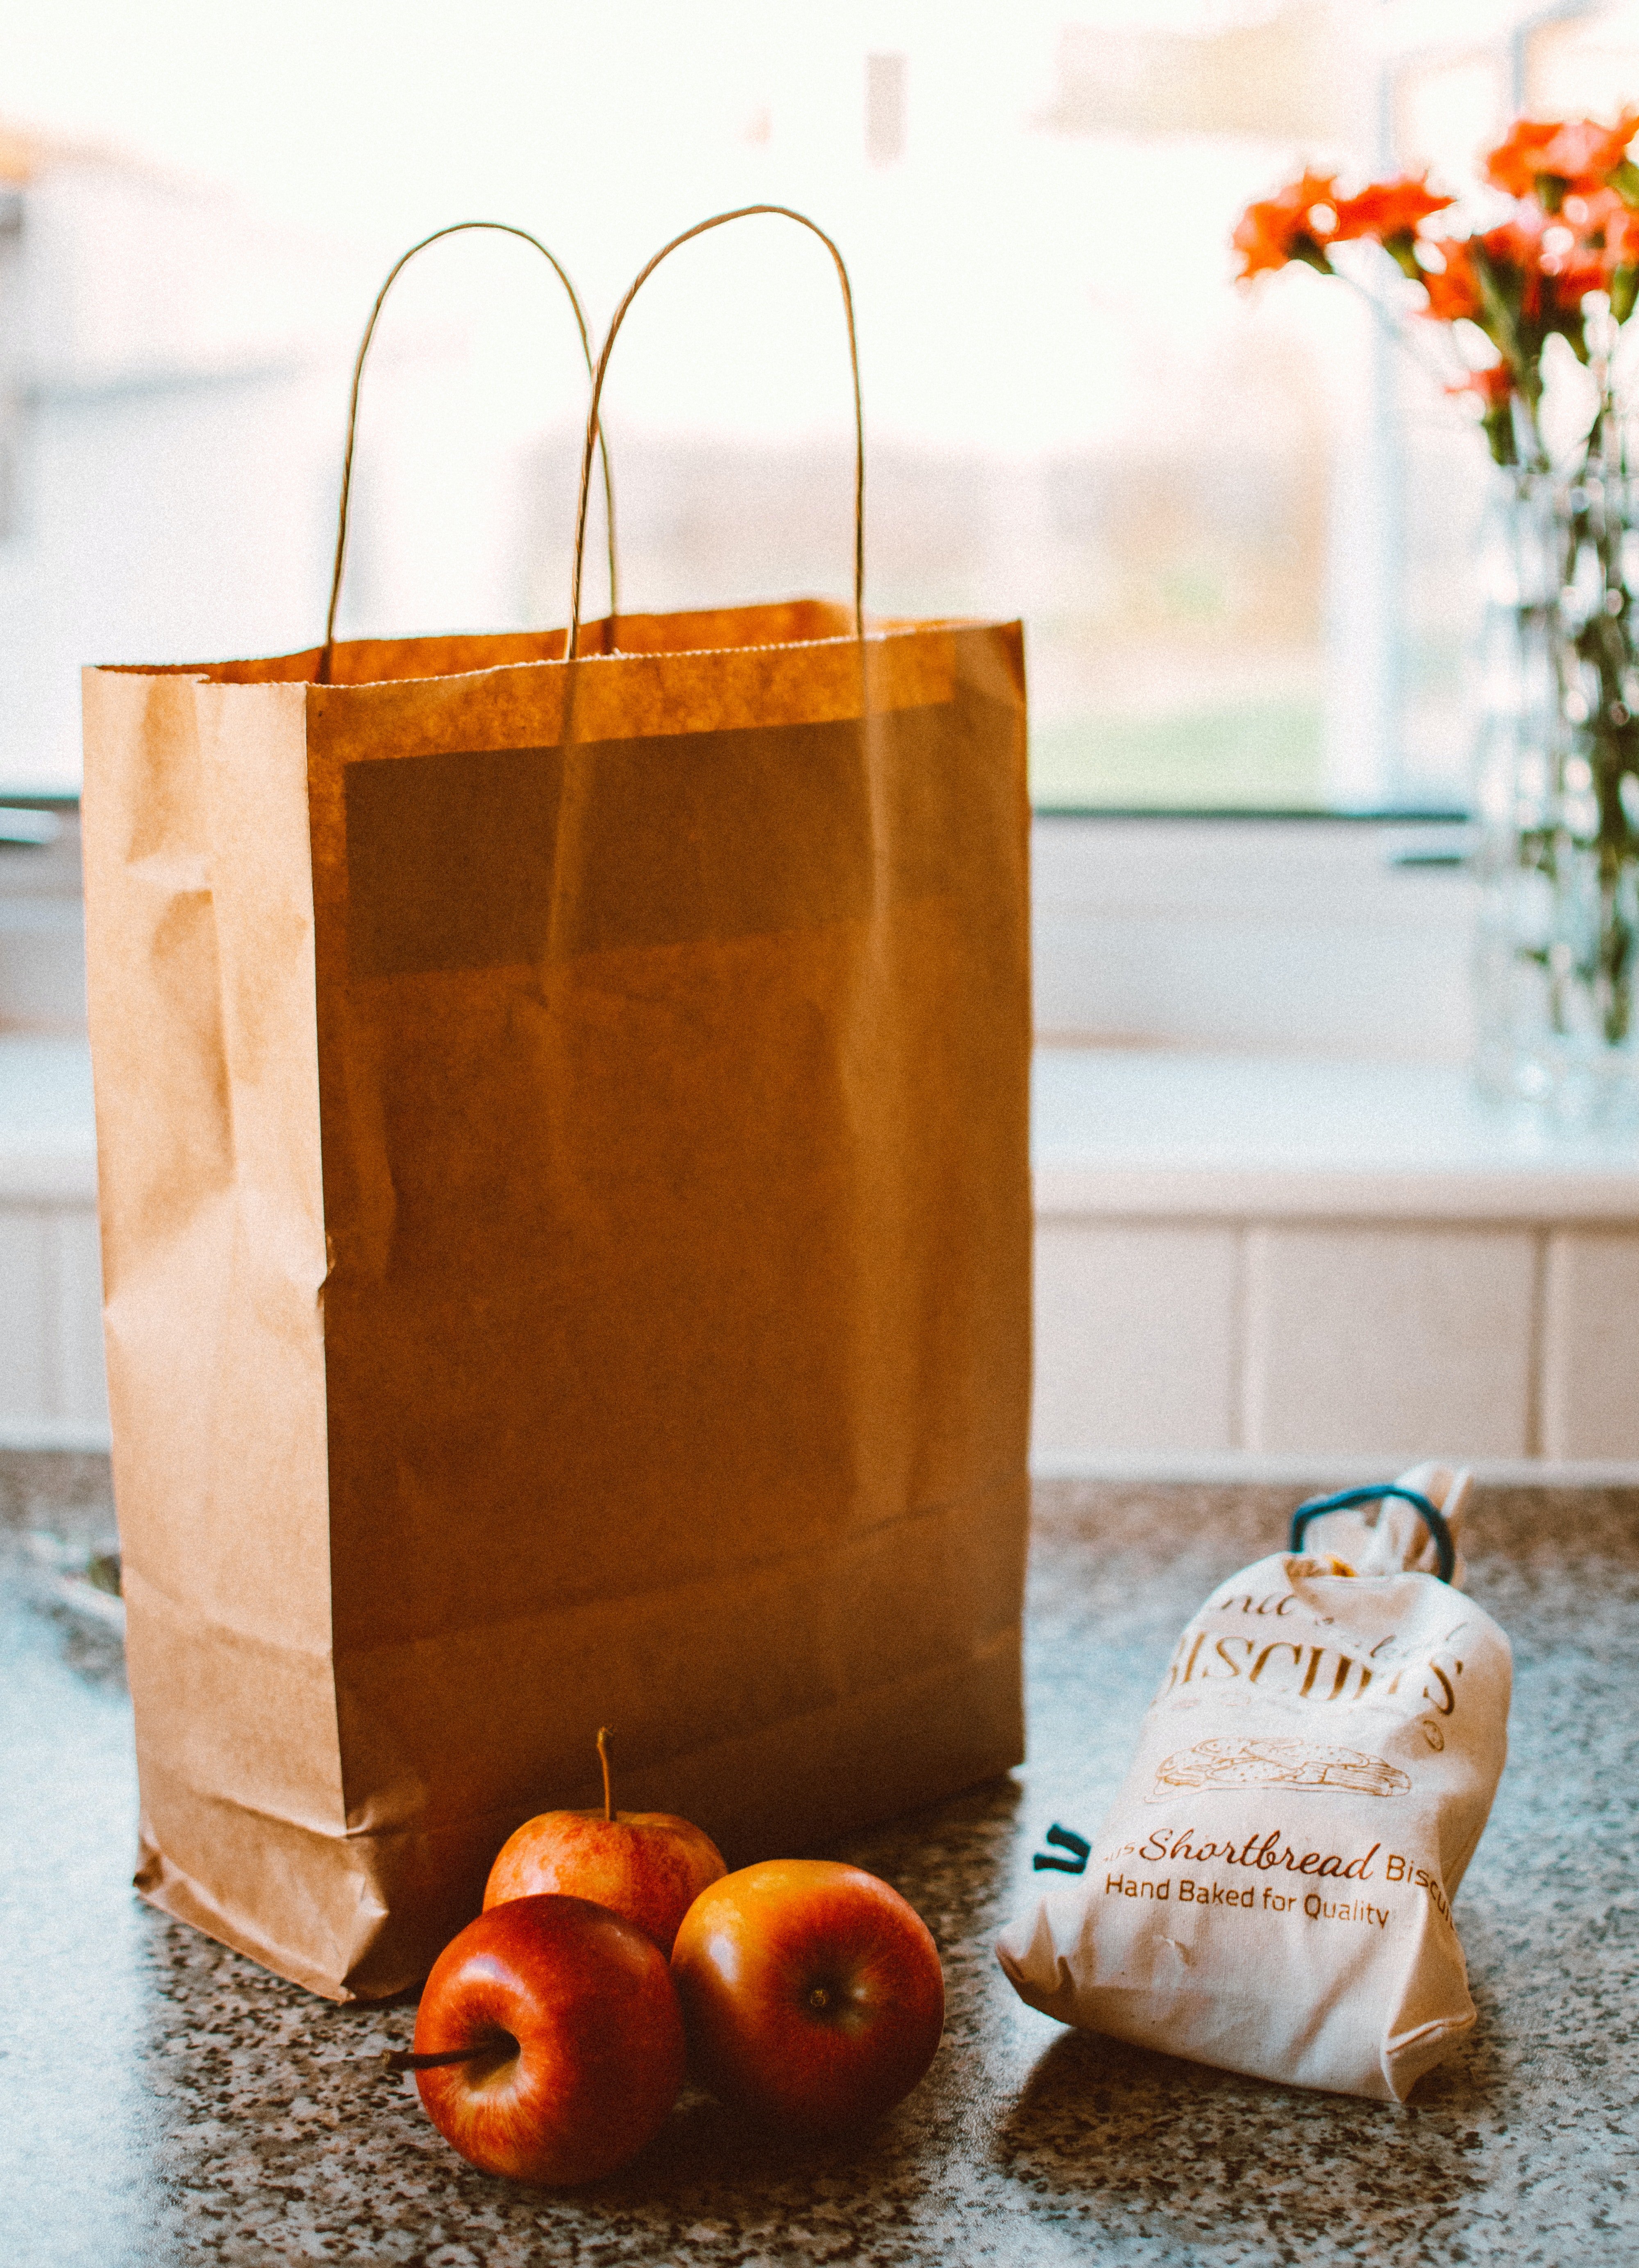 He was unpacking the groceries when we got back at him—poor bastard | Source: Pexels